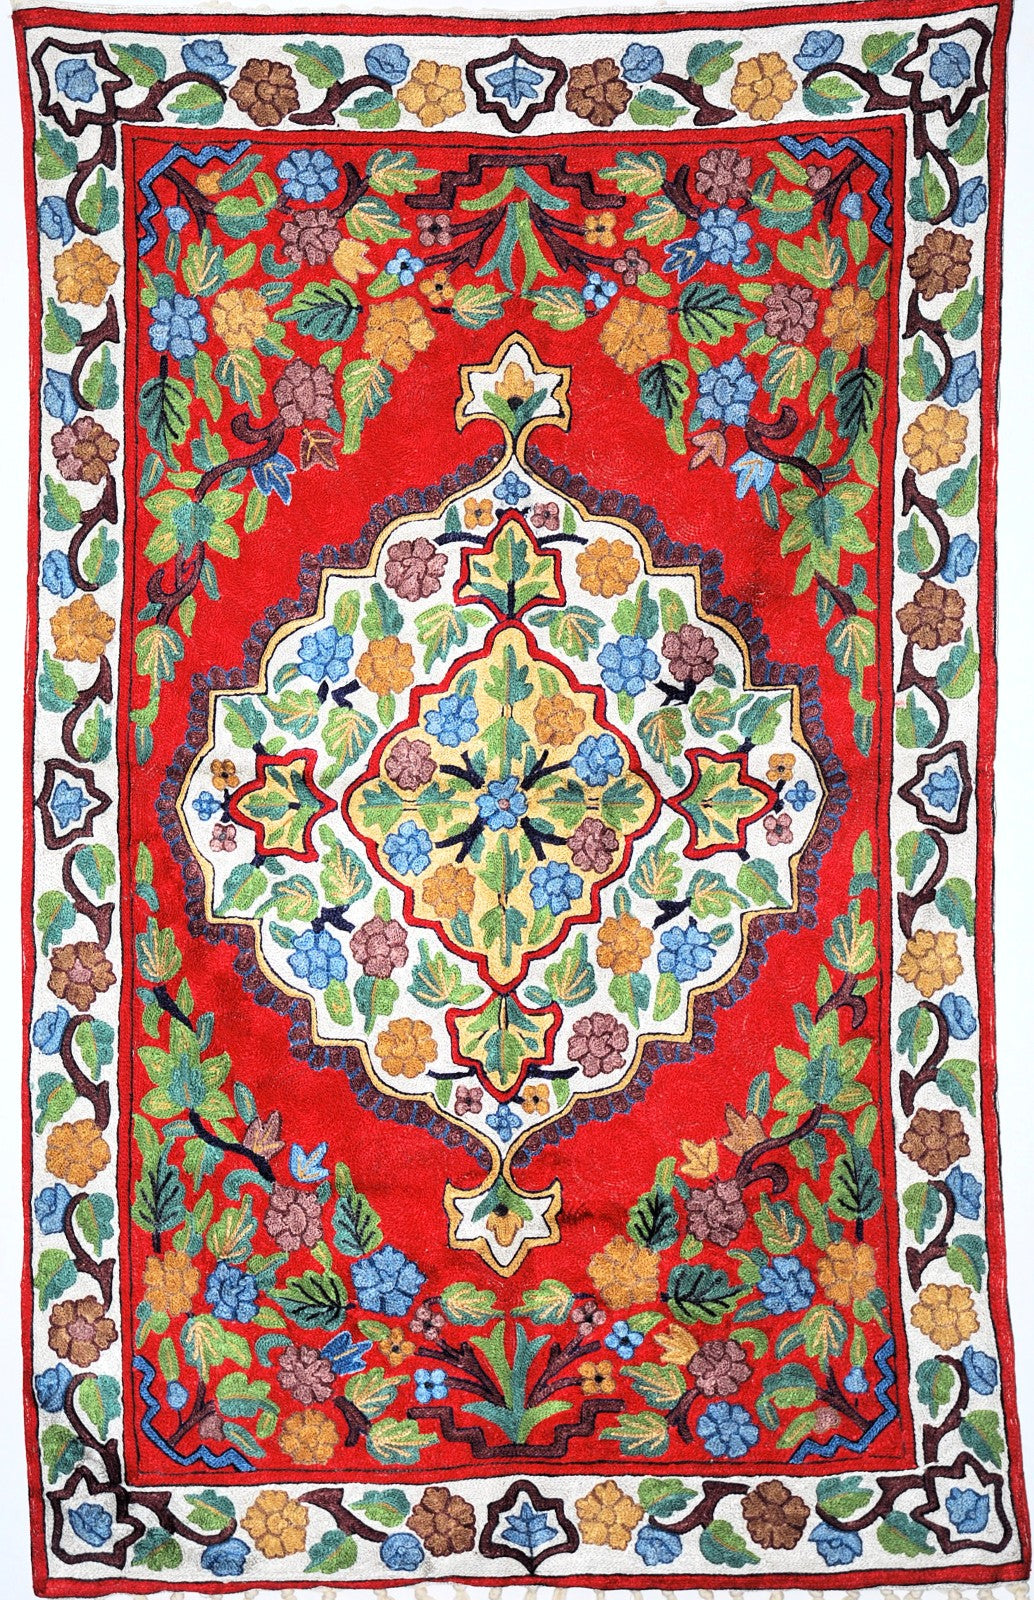 ChainStitch Tapestry Silk Wall Hanging Area Rug, Multicolor Embroidery 2.5x4 feet #CWR10101